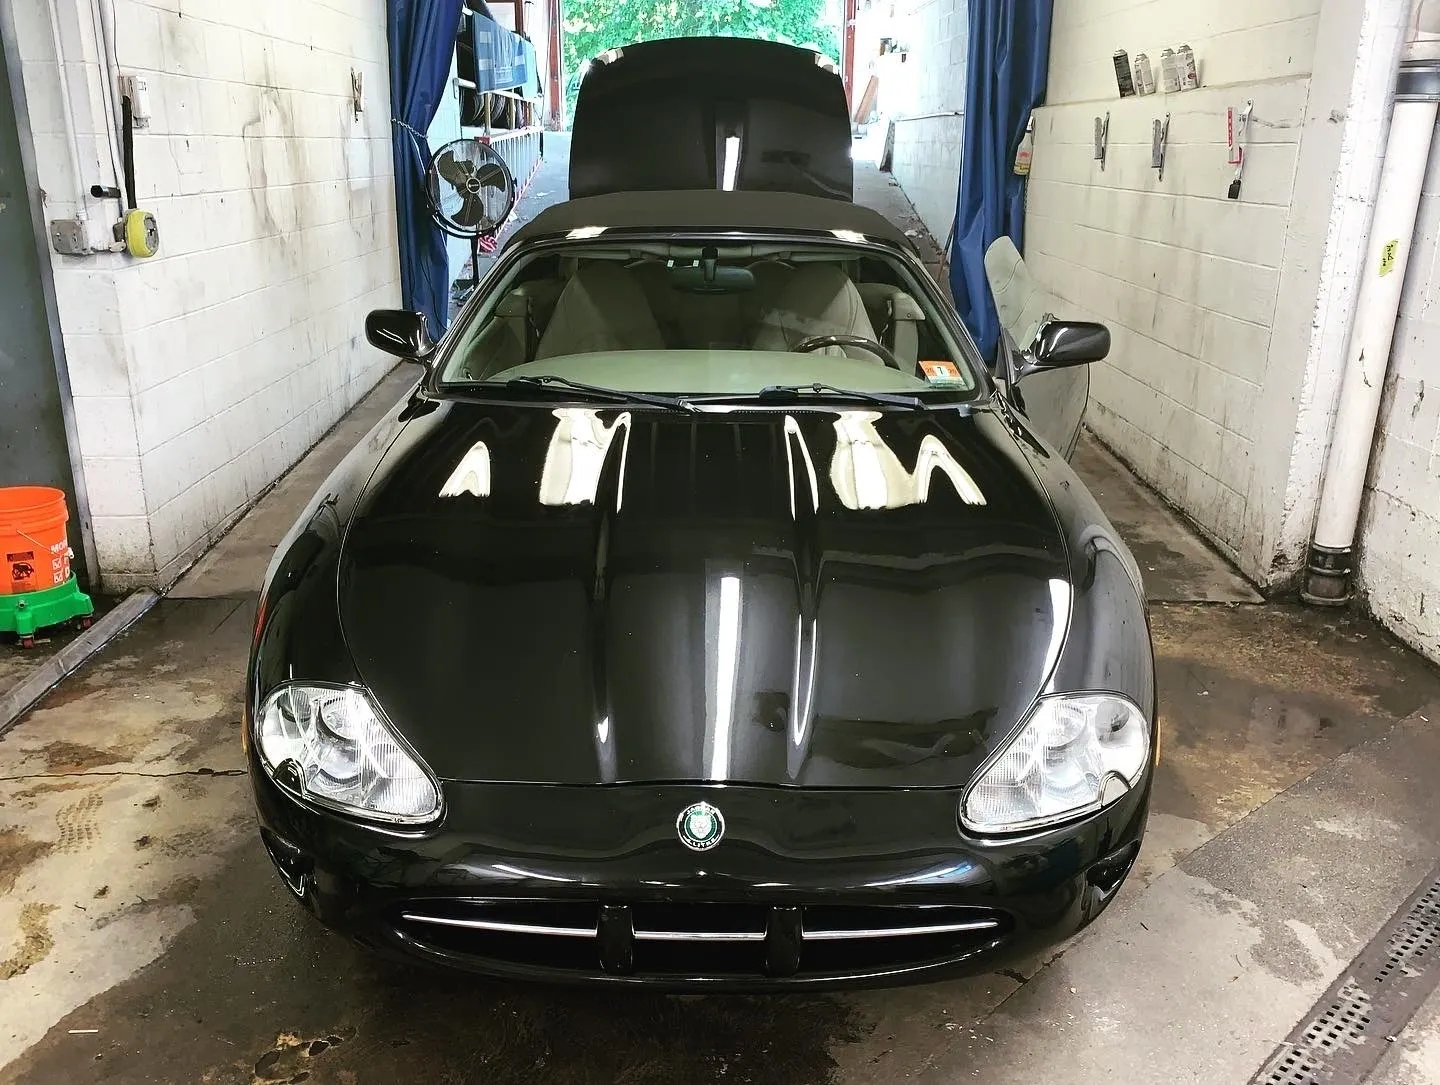 Sleek black sports car receiving maintenance and auto detailing in a garage, with its hood open and ready for some fine-tuning.